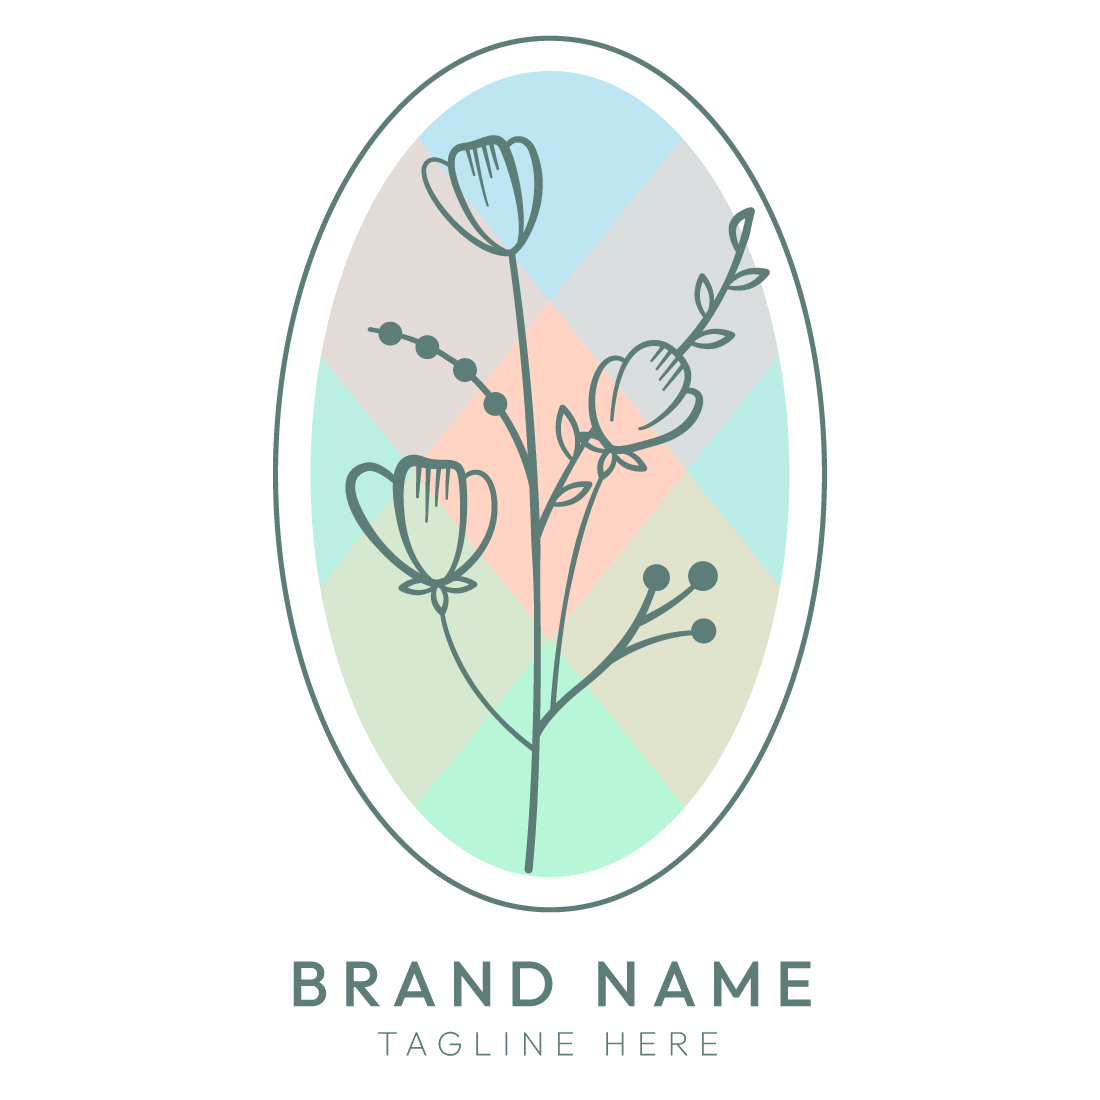 Minimalist Line Art Logo Design Bundle for Fashion, Beauty, and Nature Brands preview image.